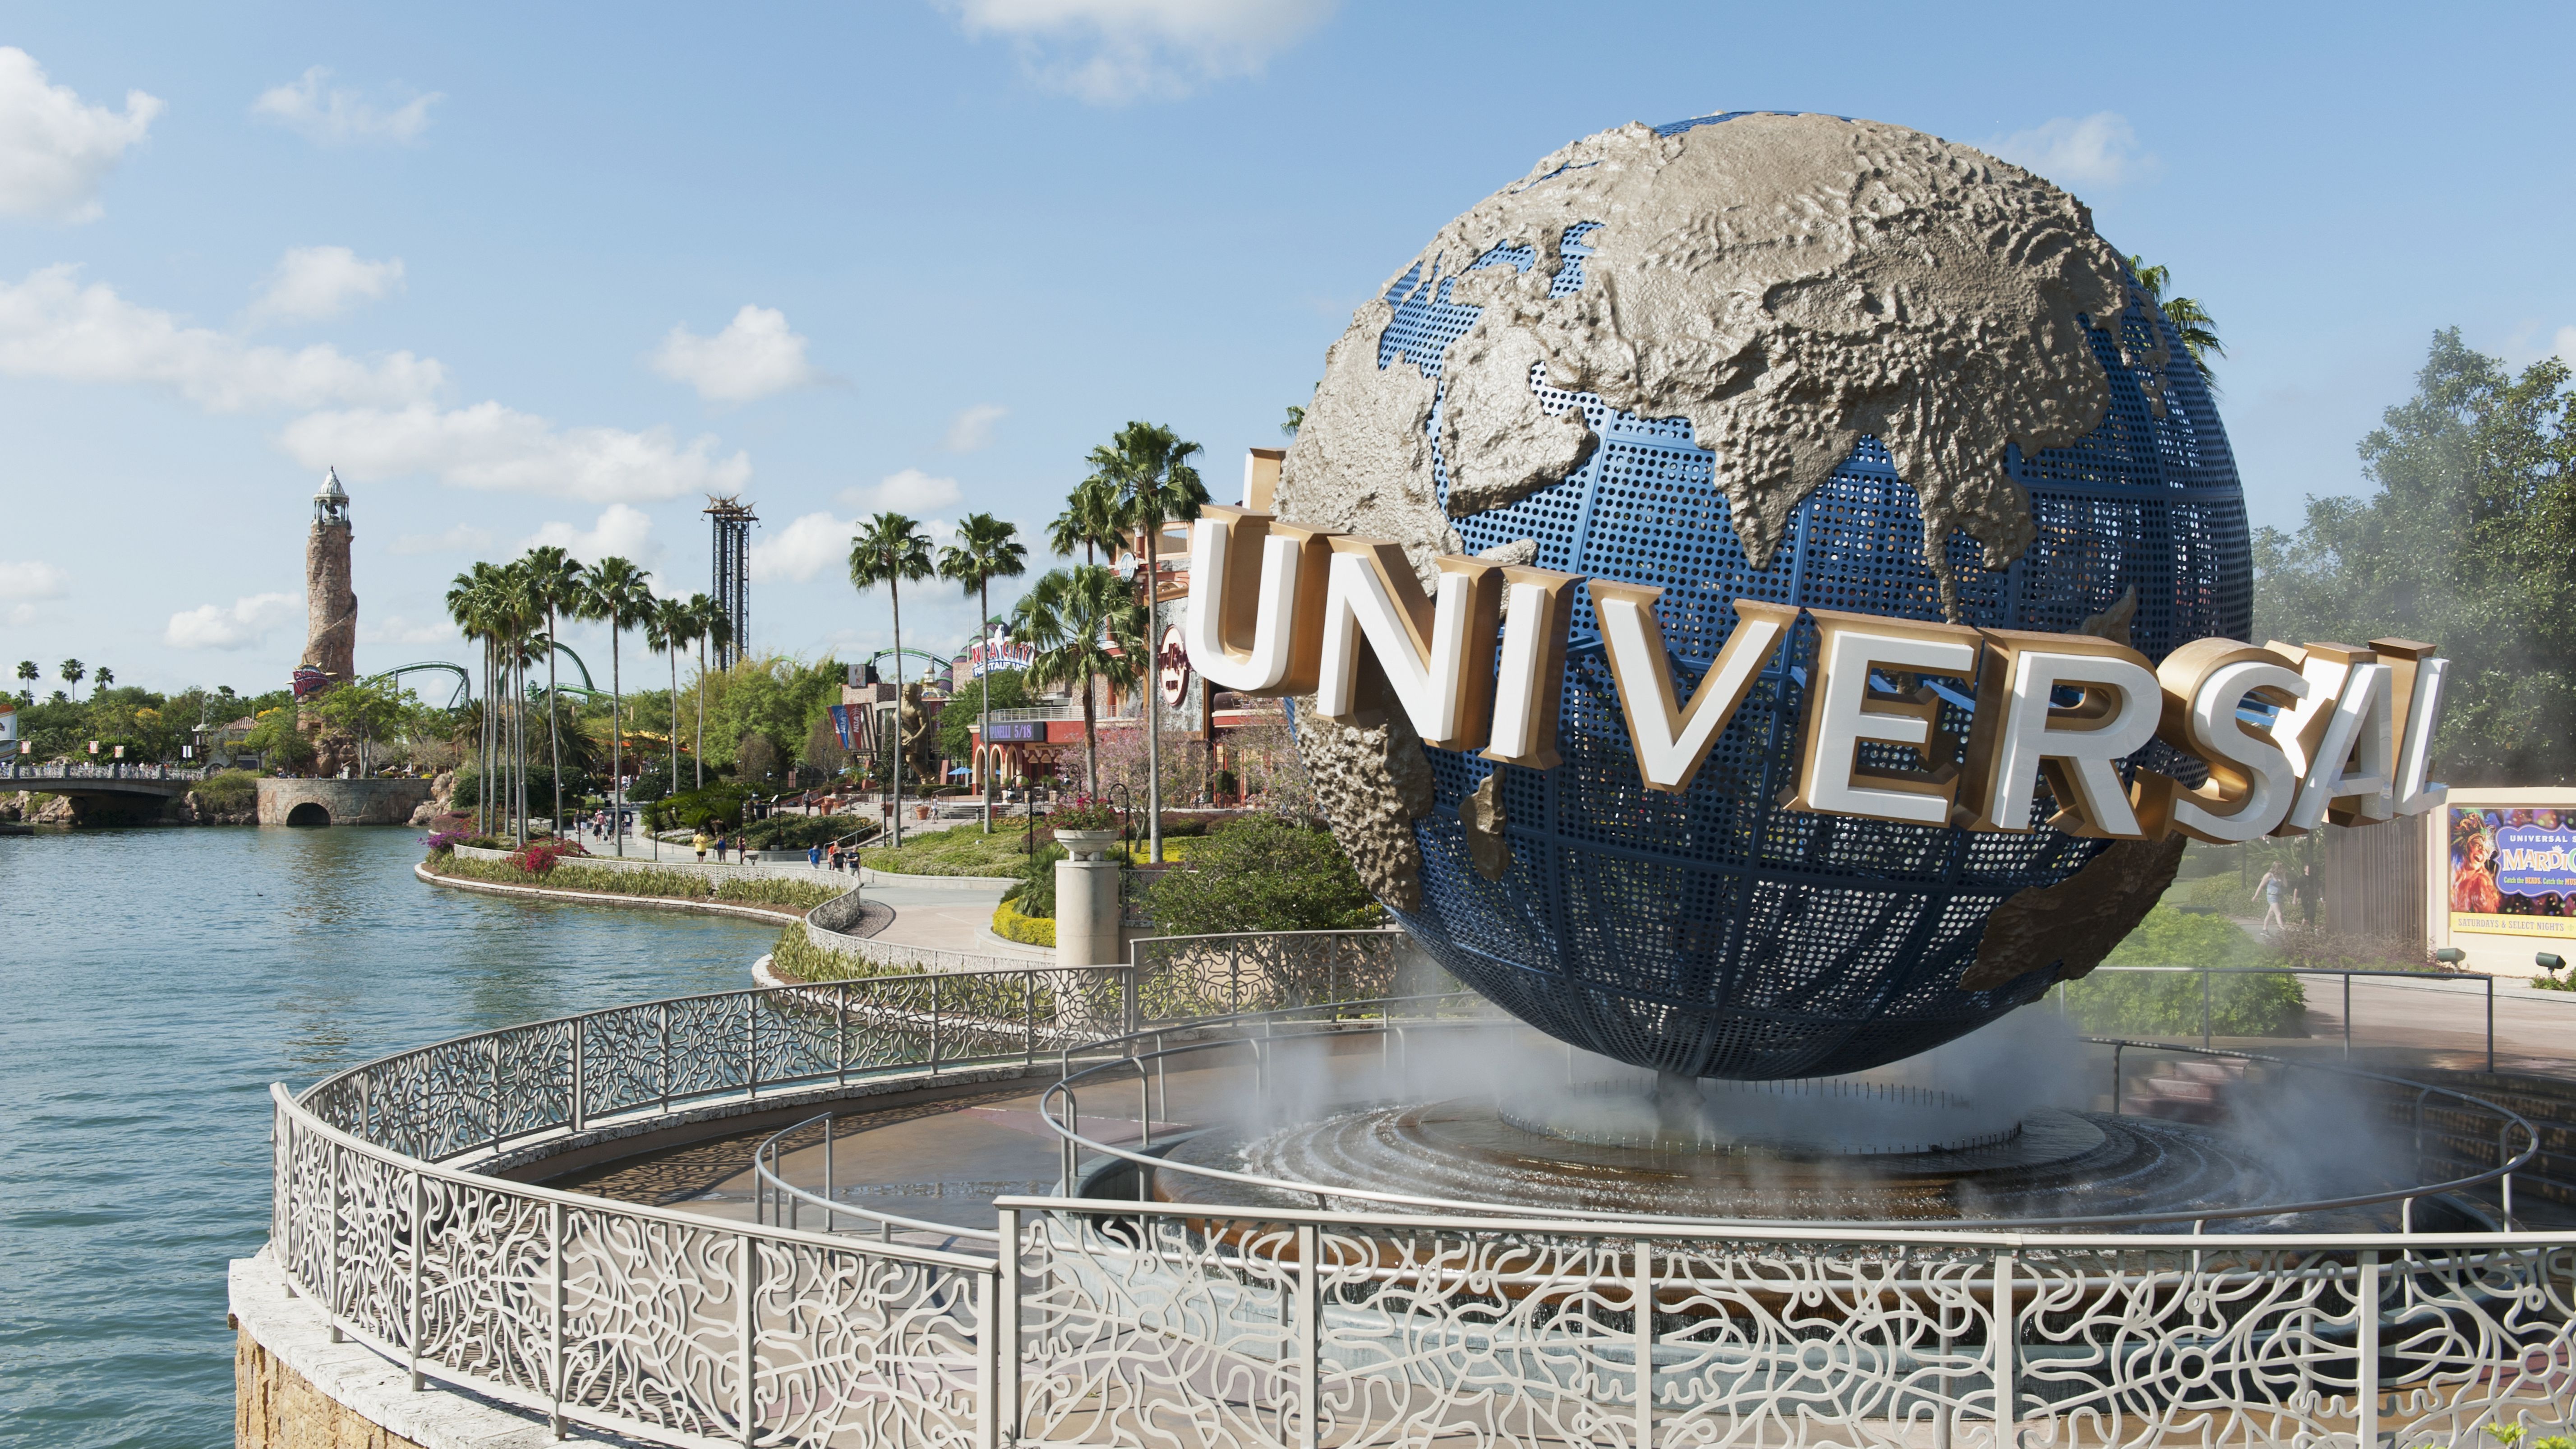 The 10 Best Rides at Universal Orlando